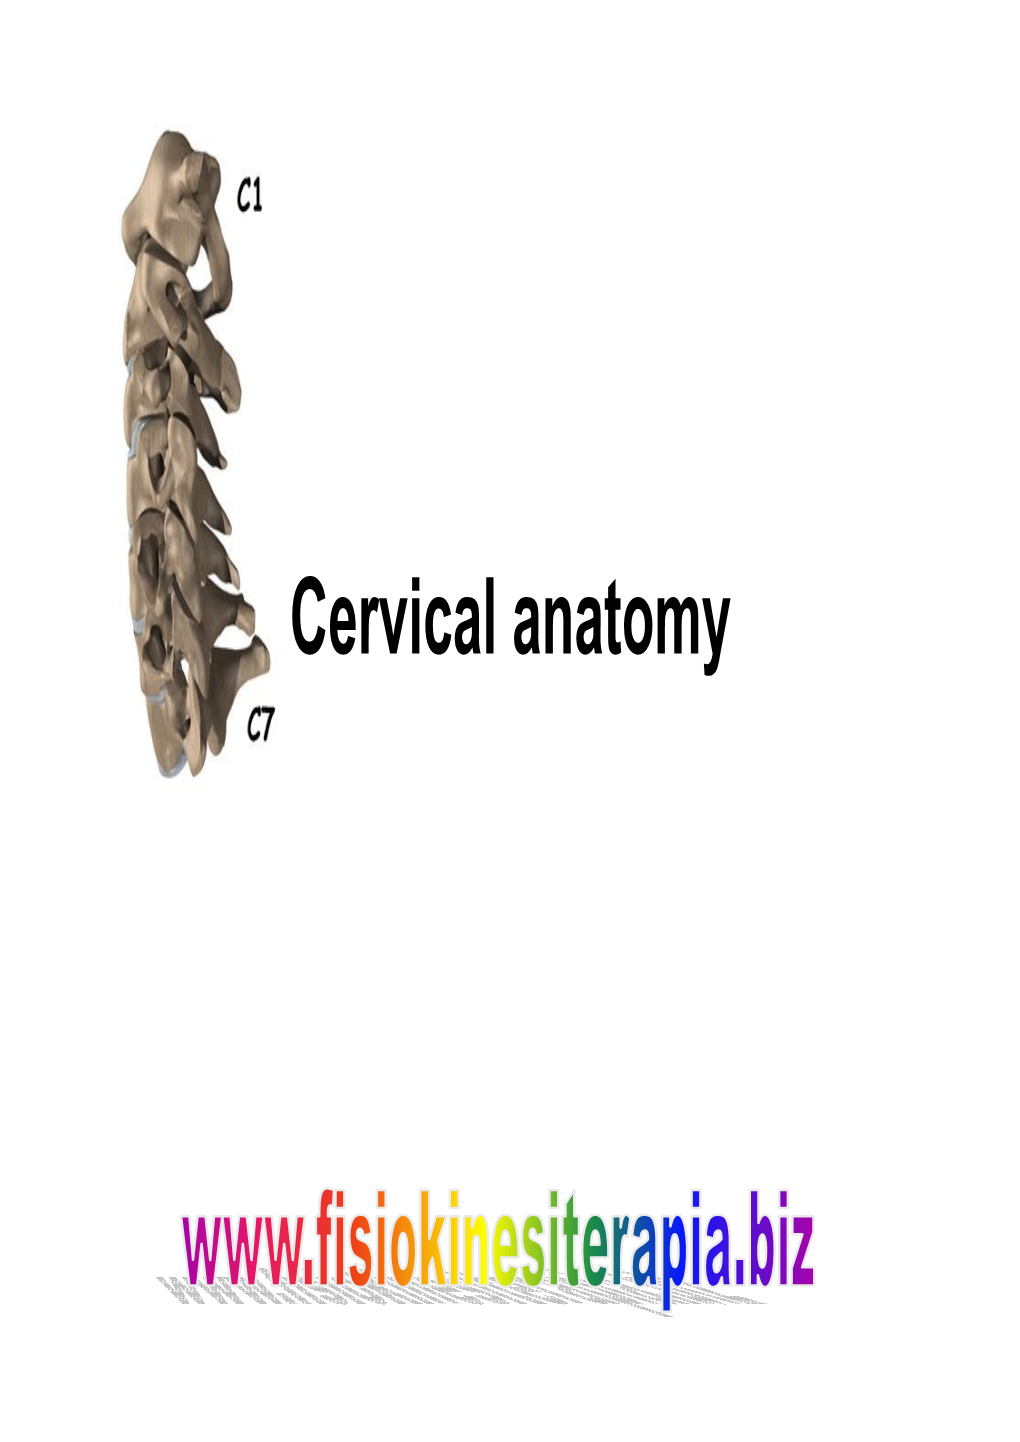 Cervical Anatomy Overview: Building the Cervical Spine • Atlas •Axis • Ligaments • Muscles •Fascia • the Vert • and How to Apply to Common Cases Atlas